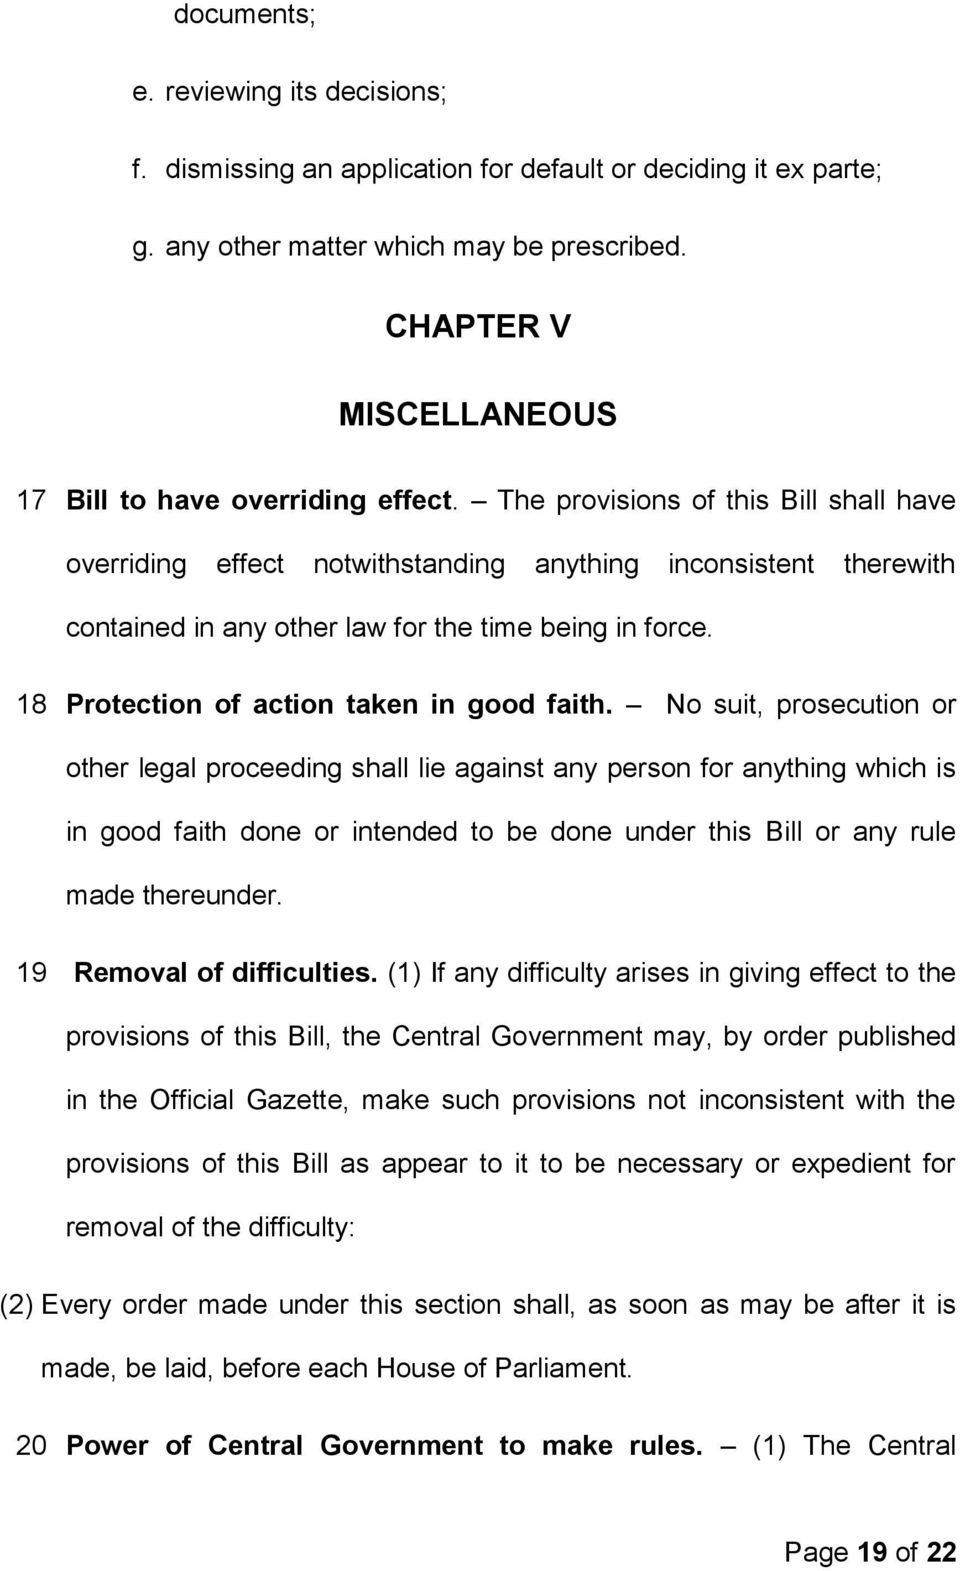 The provisions of this Bill shall have overriding effect notwithstanding anything inconsistent therewith contained in any other law for the time being in force.